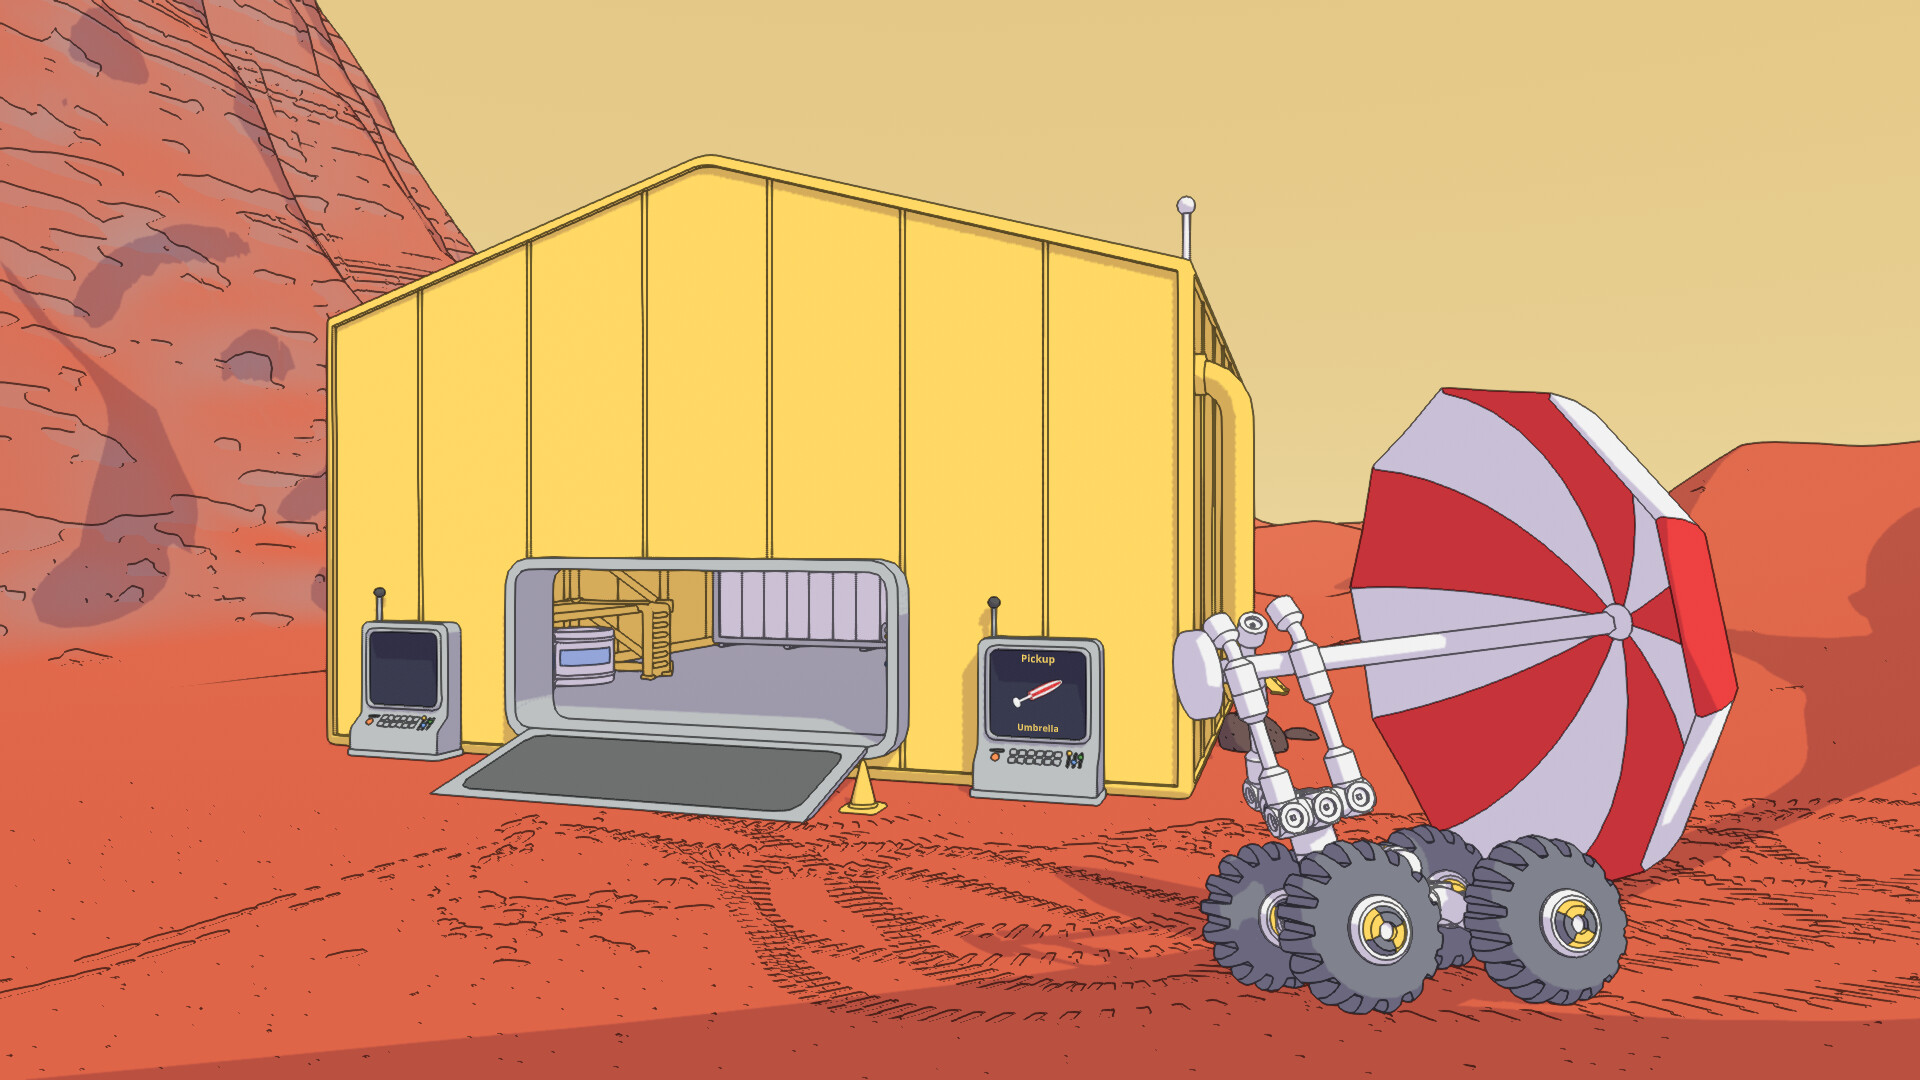  I built some wonky robots in Mars First Logistics, and they keep spilling potatoes 